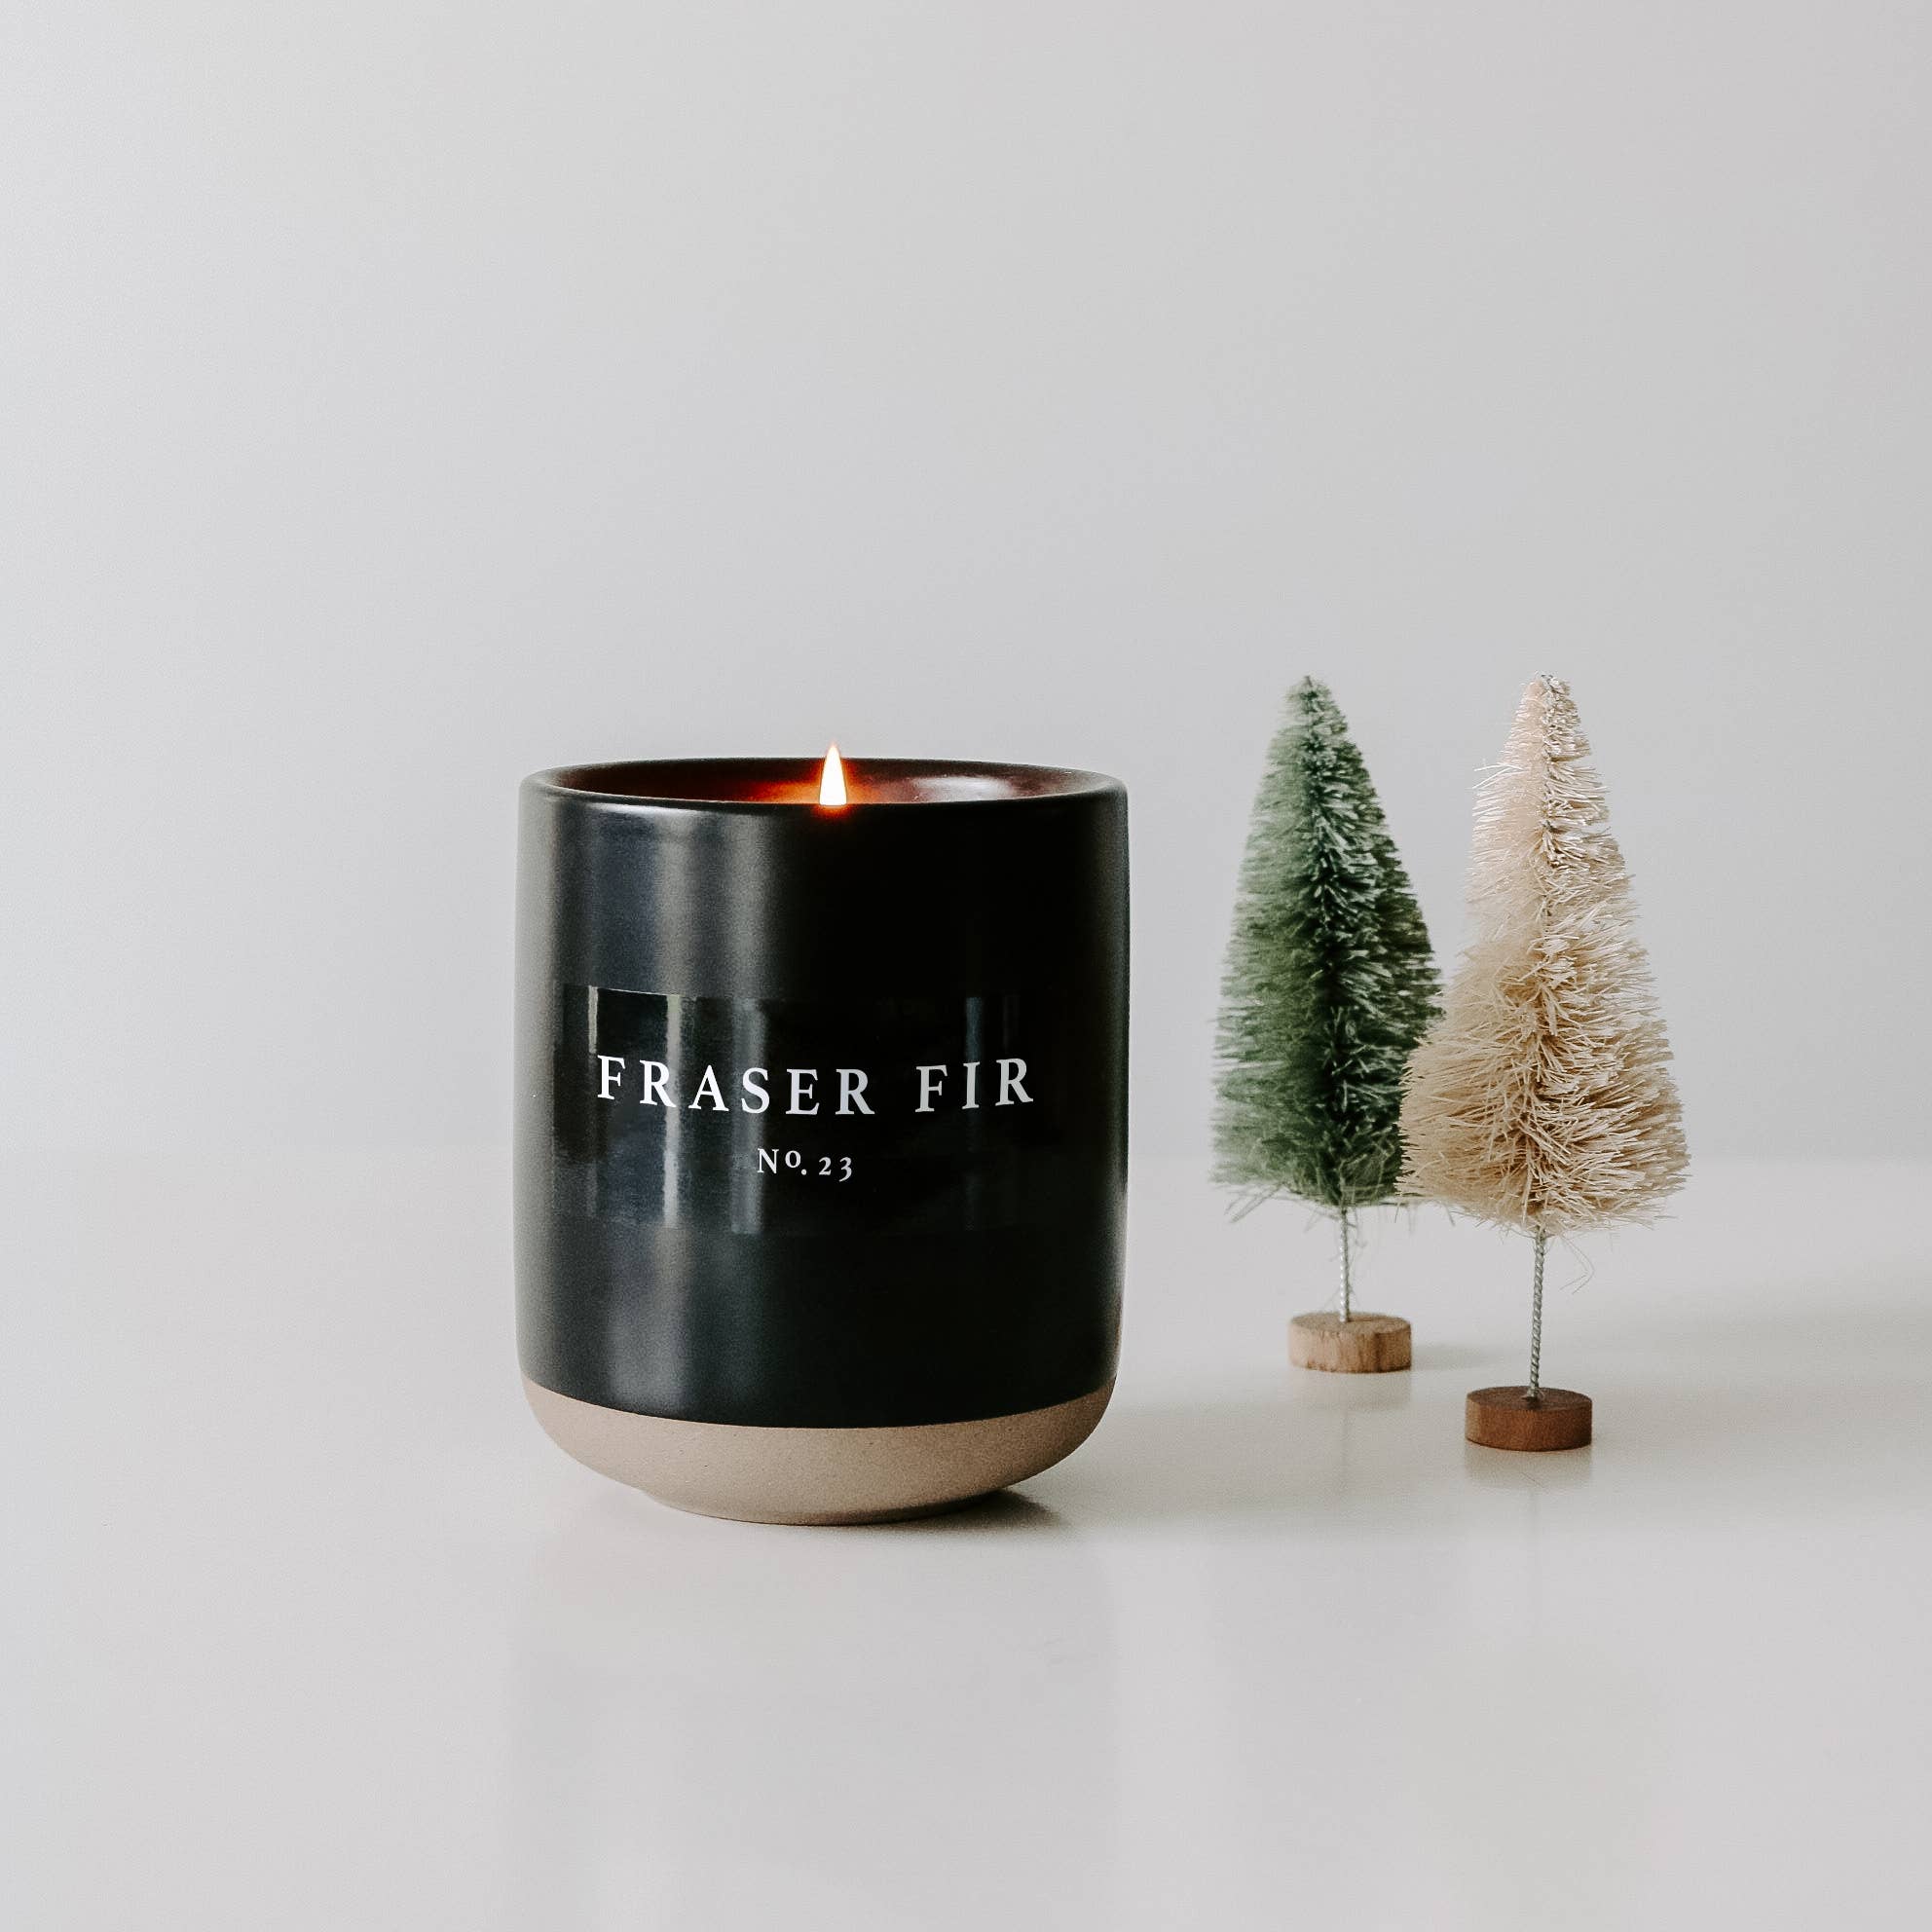 Sweet Water Decor - Fraser Fir 12 oz Soy Candle-Christmas Home Decor & Gift